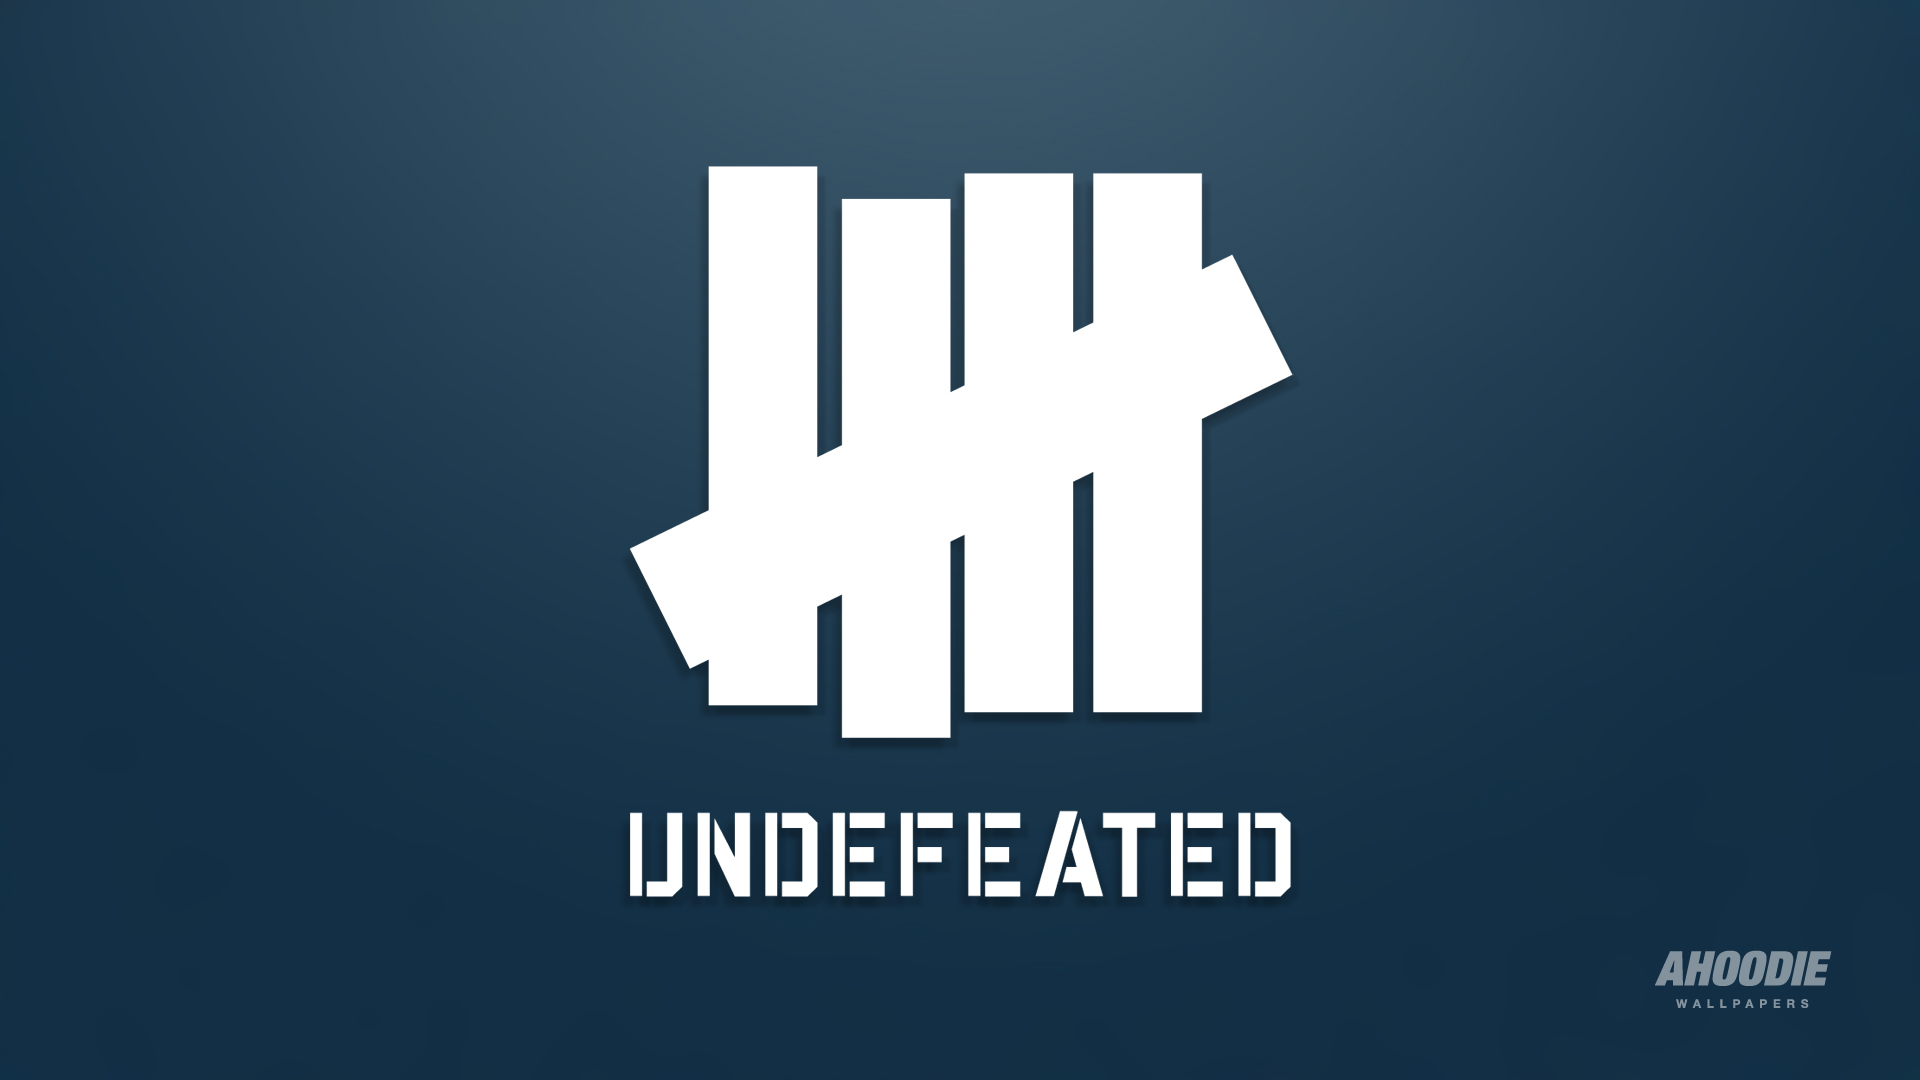 Wallpapers Undefeated Ahoodieahoodie 1920x1080 | #185456 #undefeated